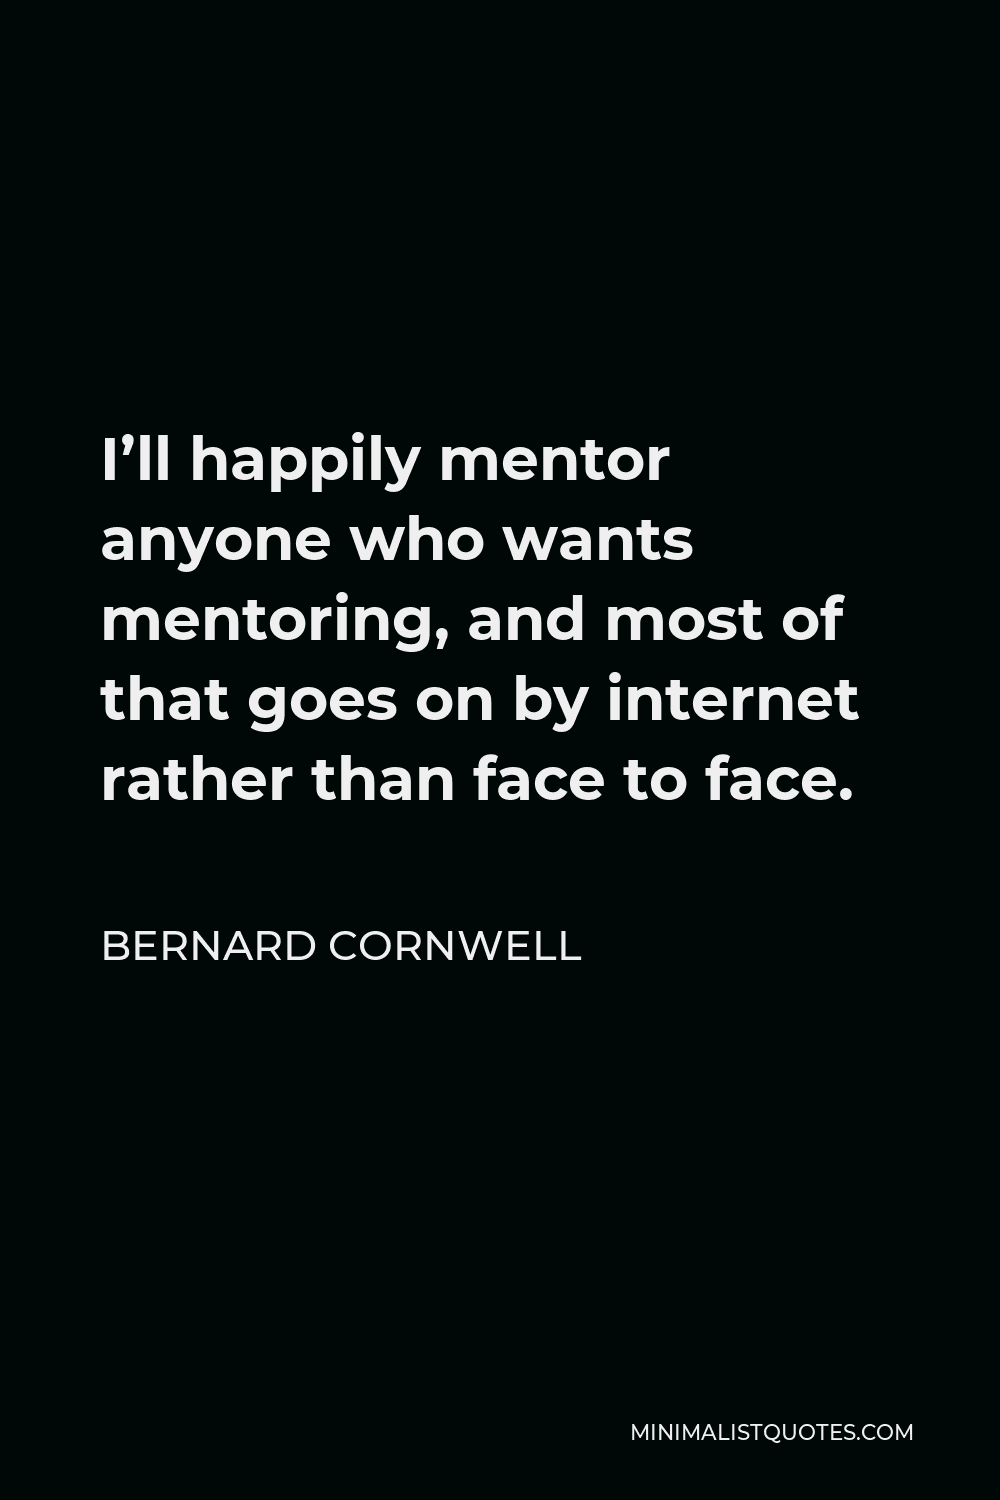 Bernard Cornwell Quote - I’ll happily mentor anyone who wants mentoring, and most of that goes on by internet rather than face to face.